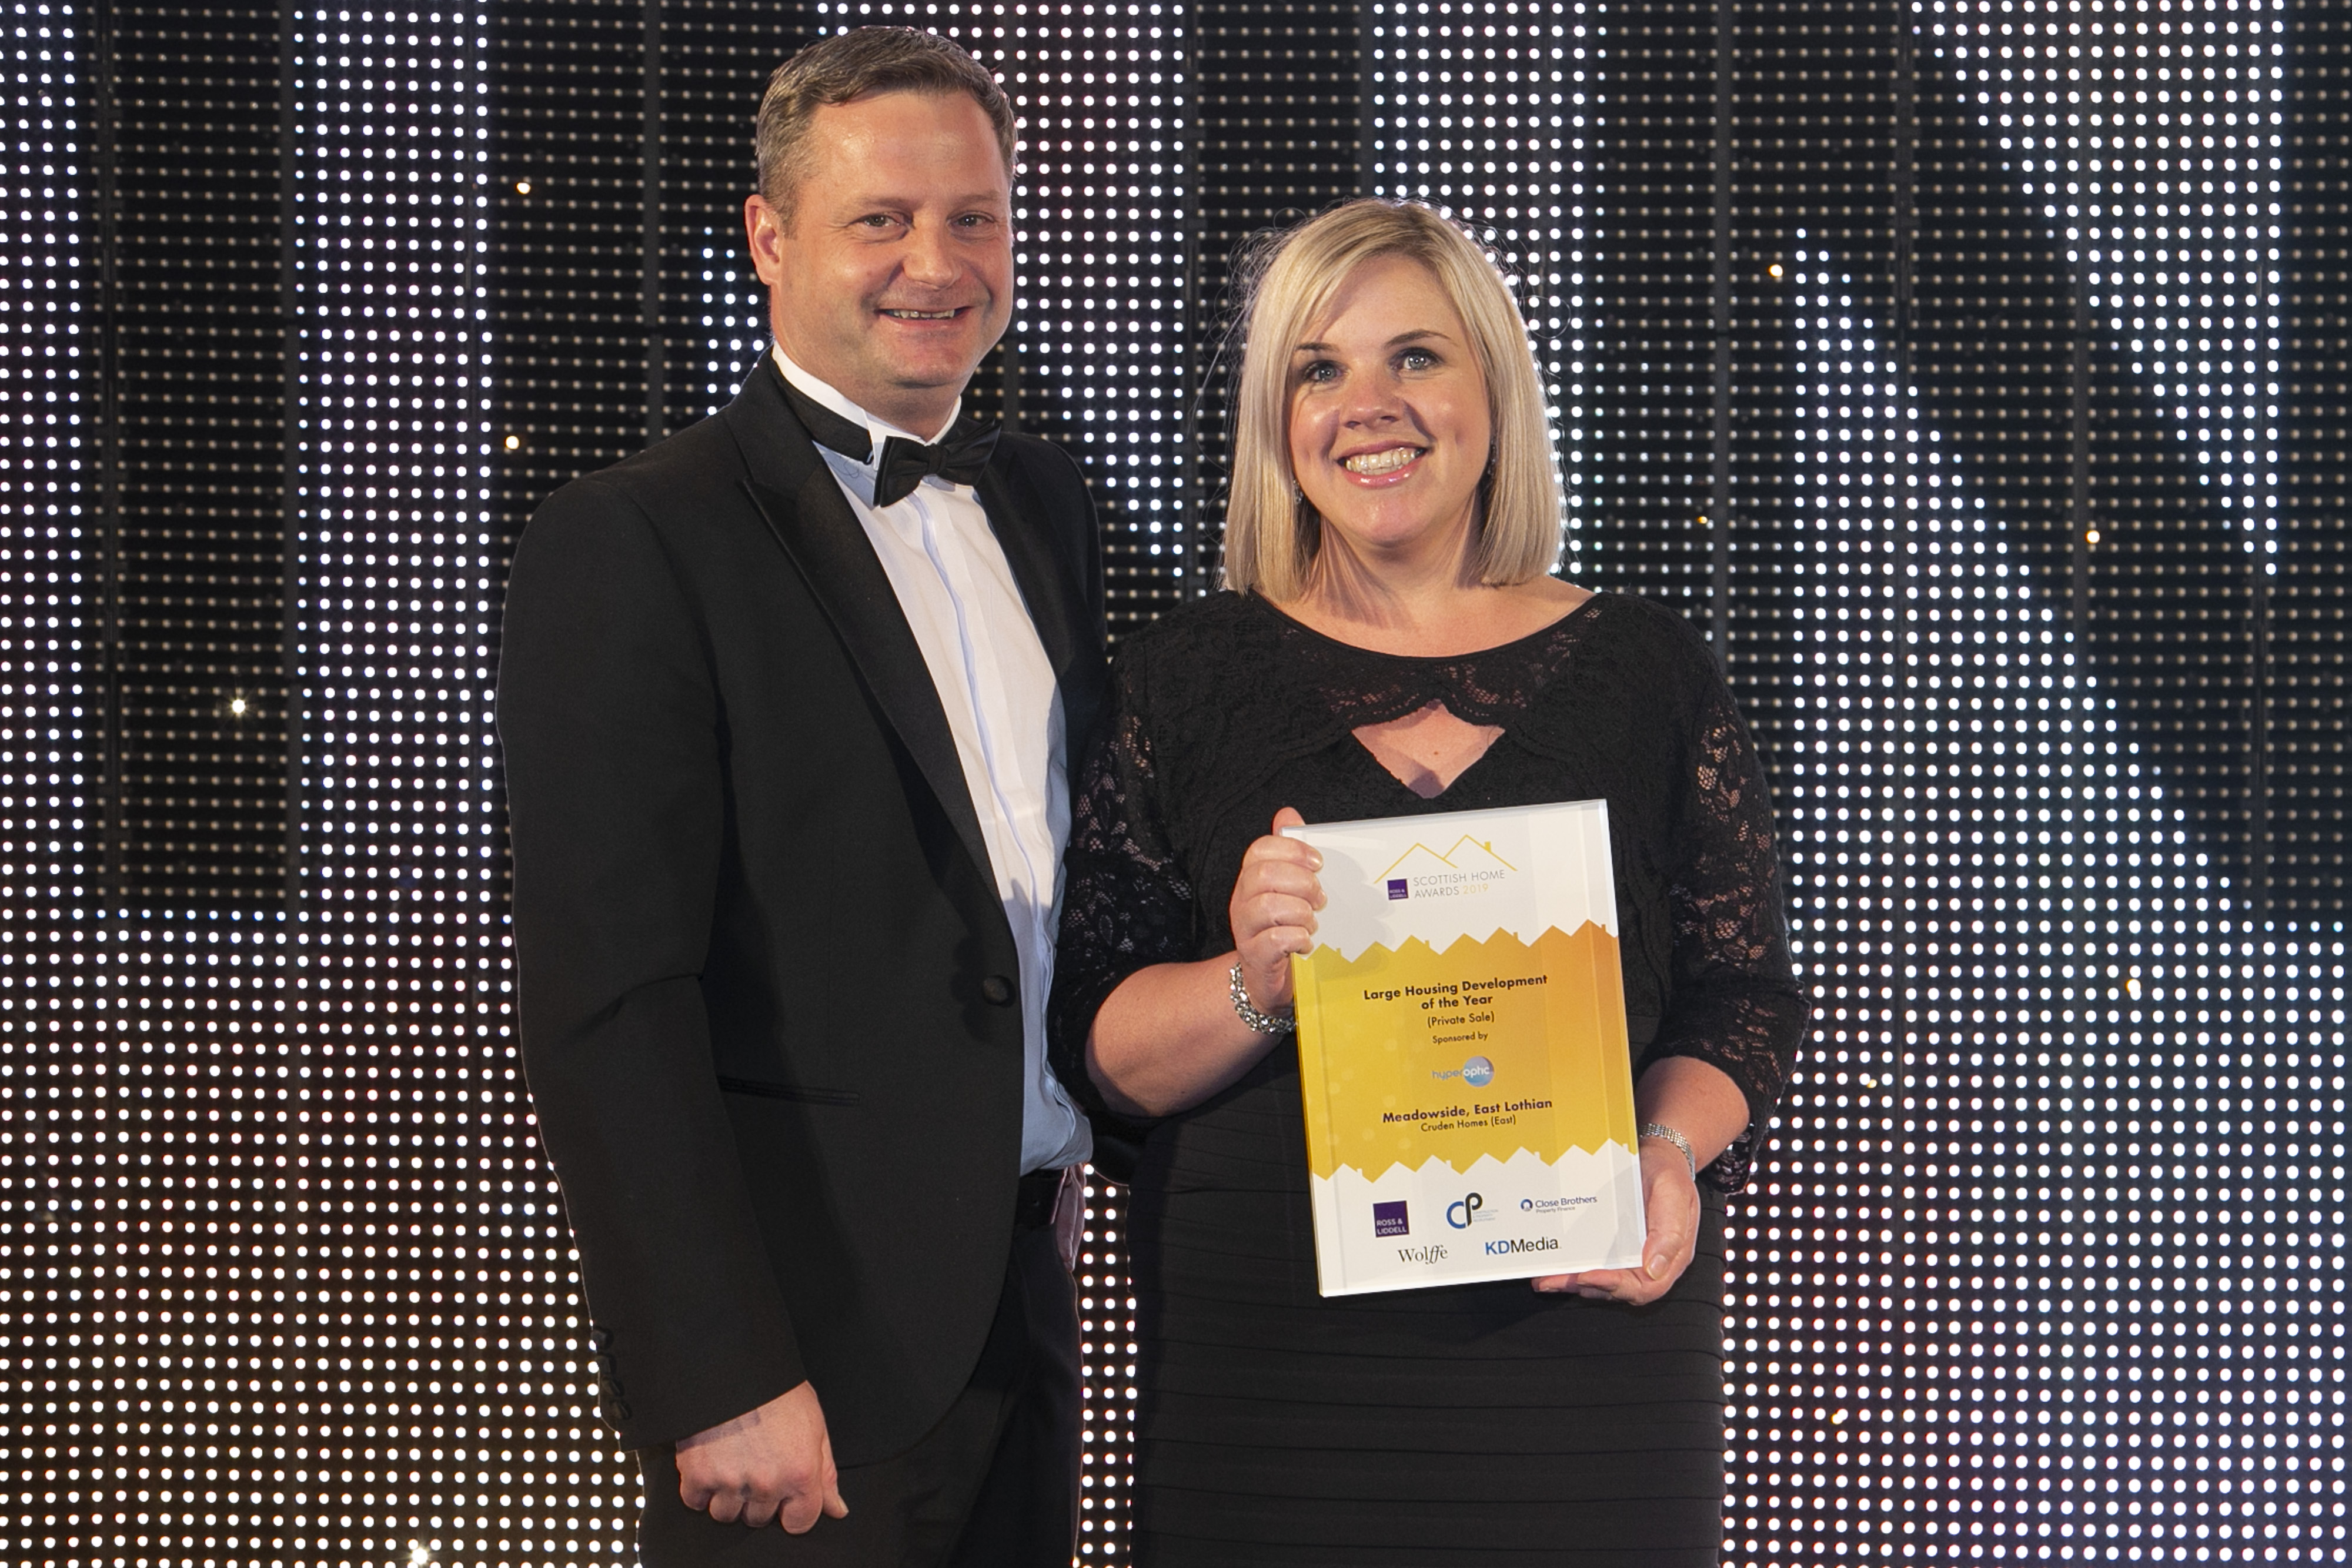 Hazel Davies sales and marketing director of Cruden Homes collecting award for Large Housing Development of the Year at Scottish Home Awards